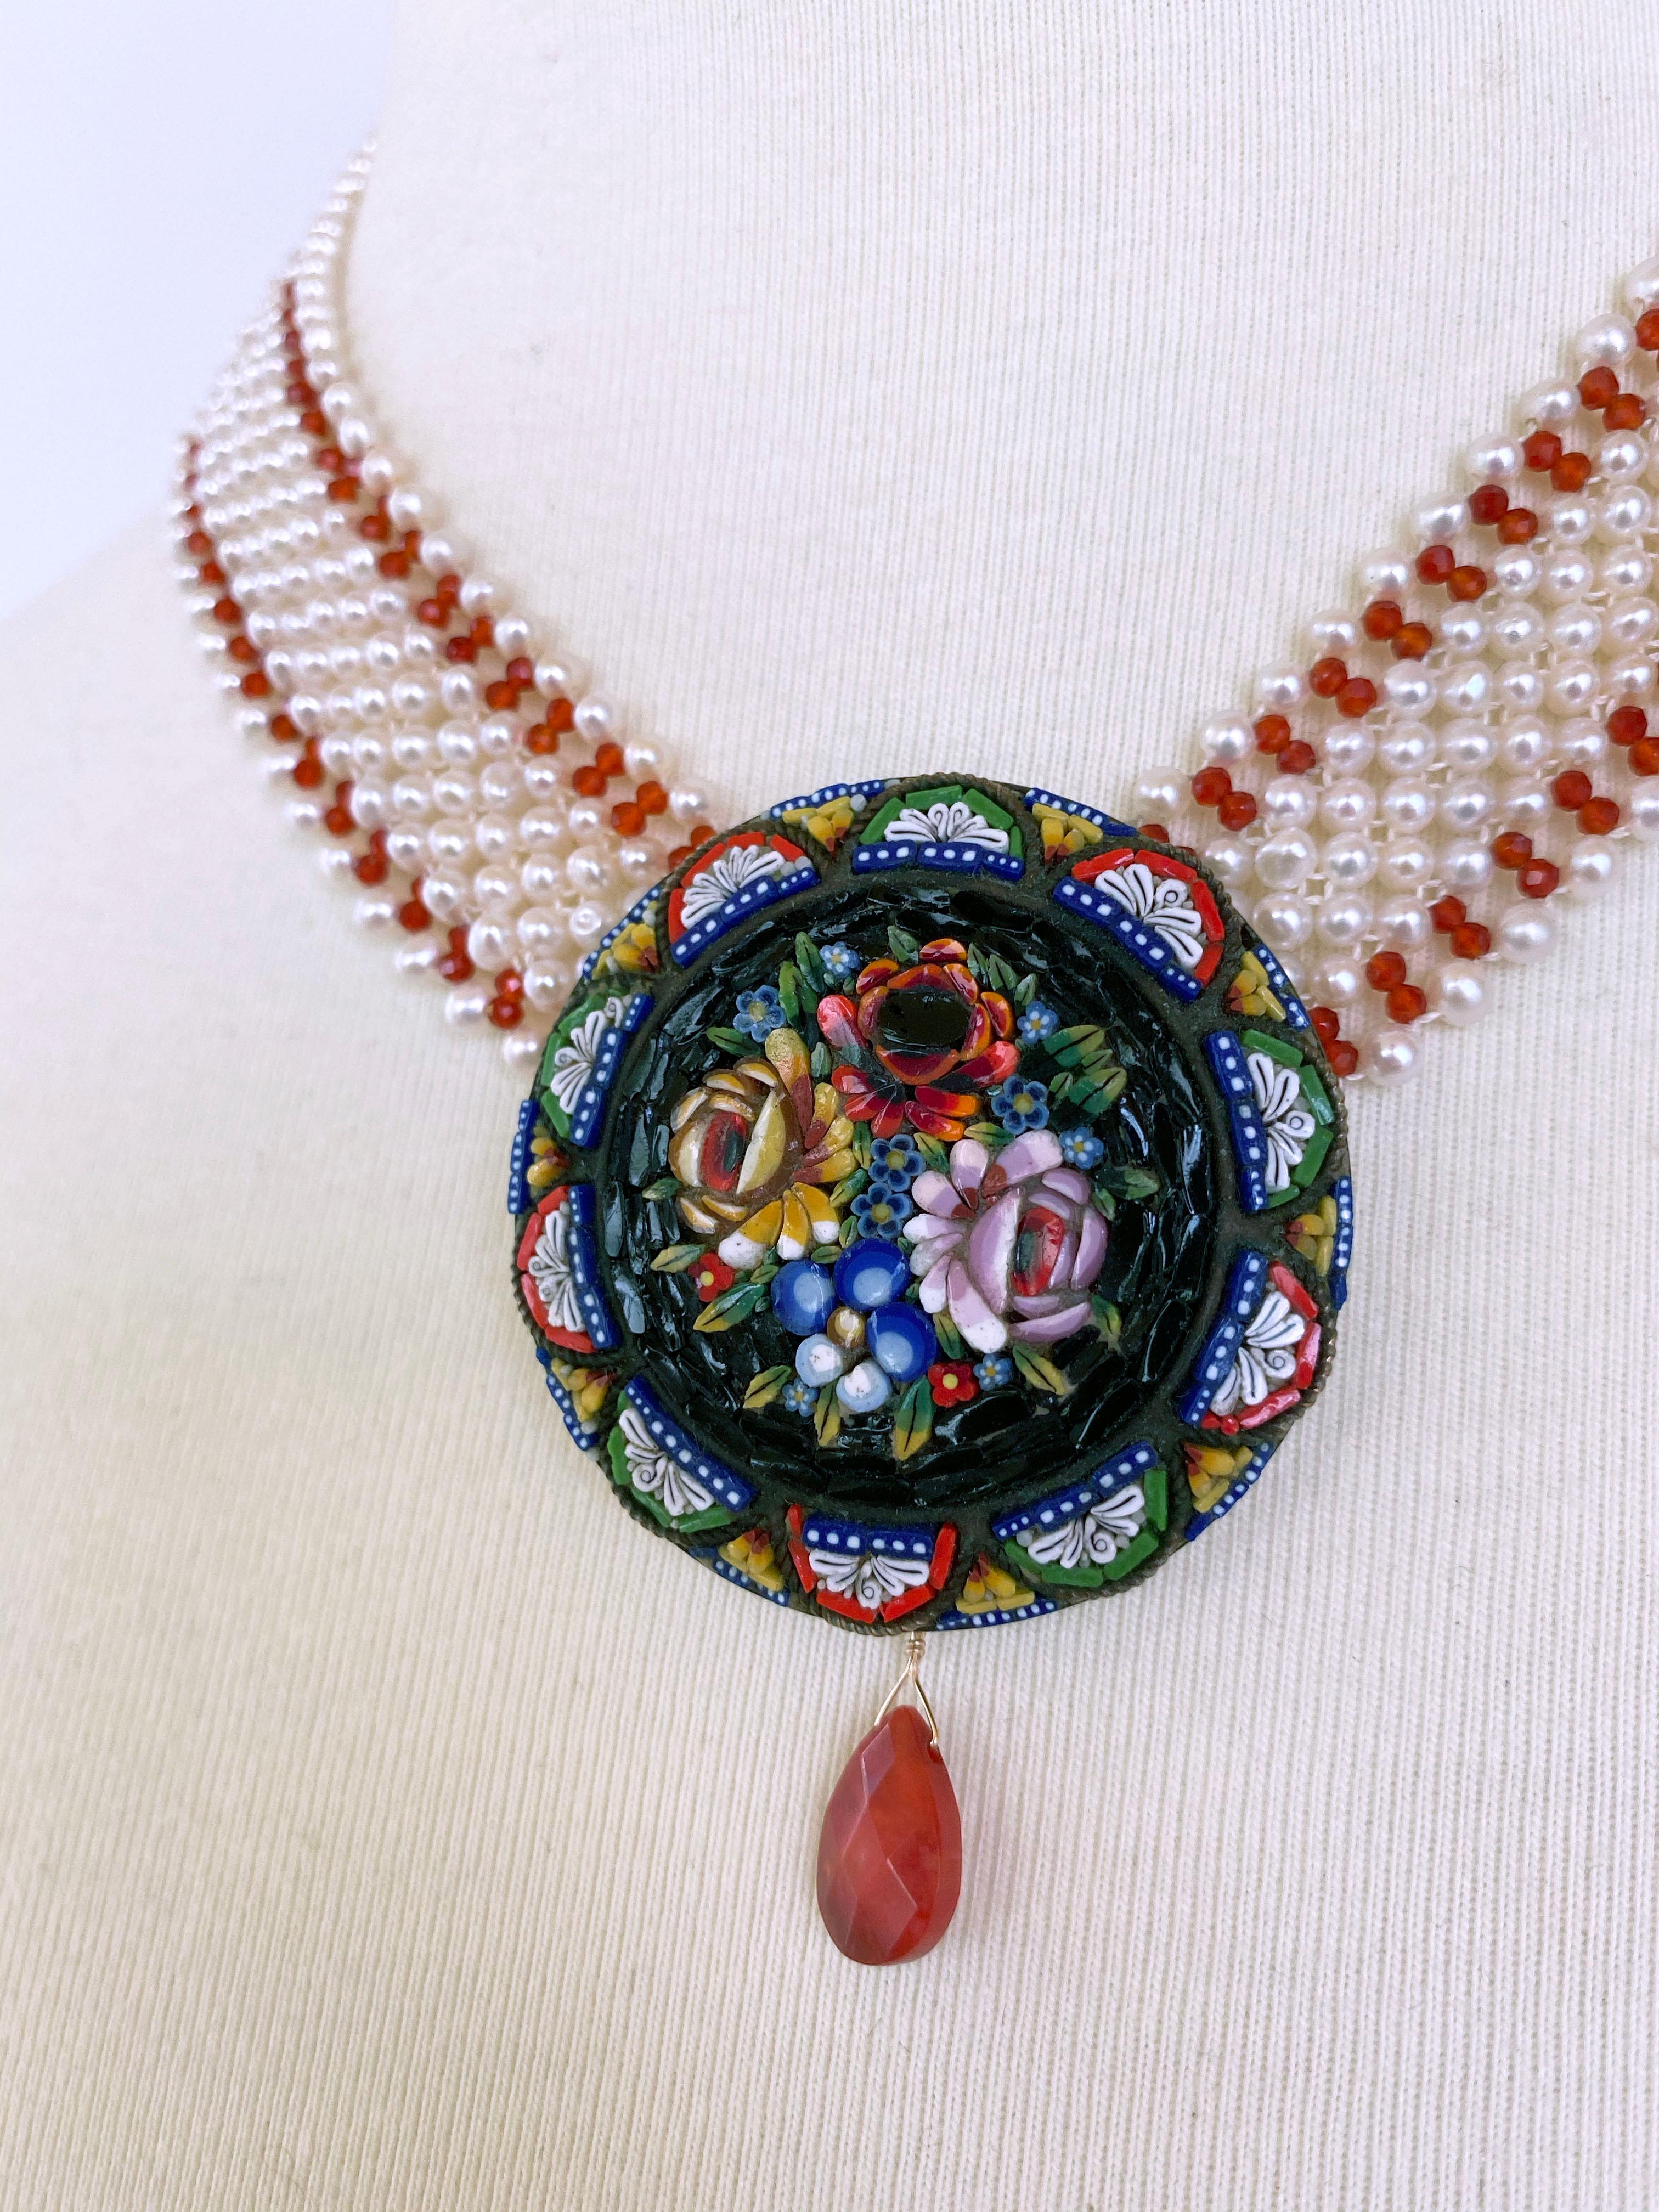 Women's or Men's Marina J. Woven Pearl and Carnelian Necklace with Mosaic Centerpiece and Coral